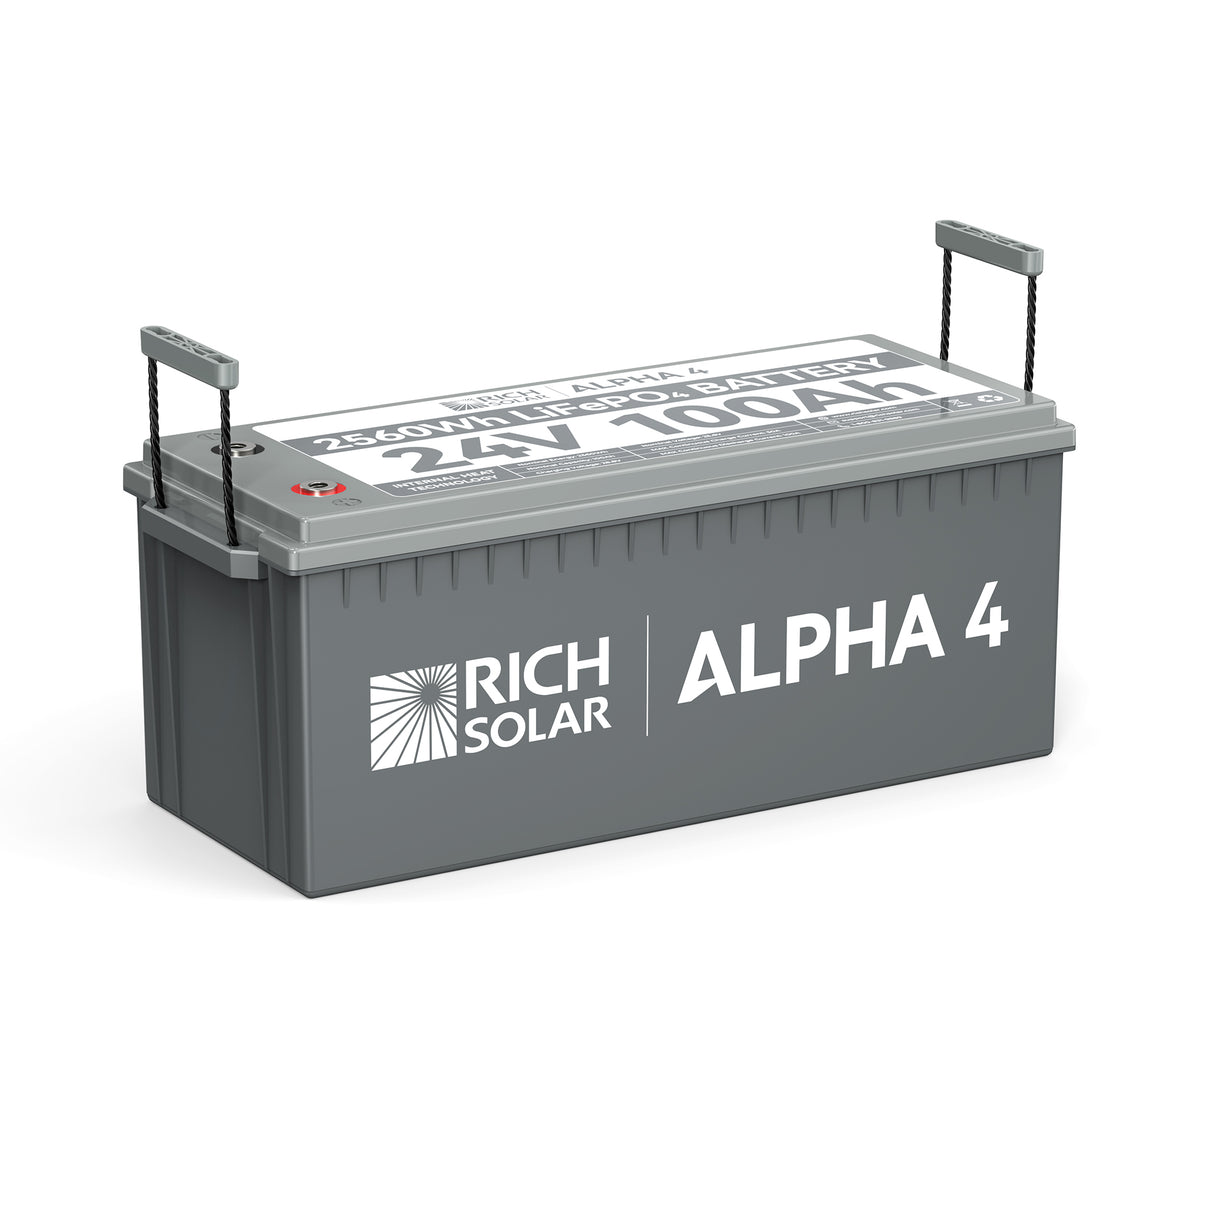 24V 100Ah LiFePO4 Lithium Iron Phosphate Battery w/ Internal Heating and  Bluetooth Function (Pre-Order)